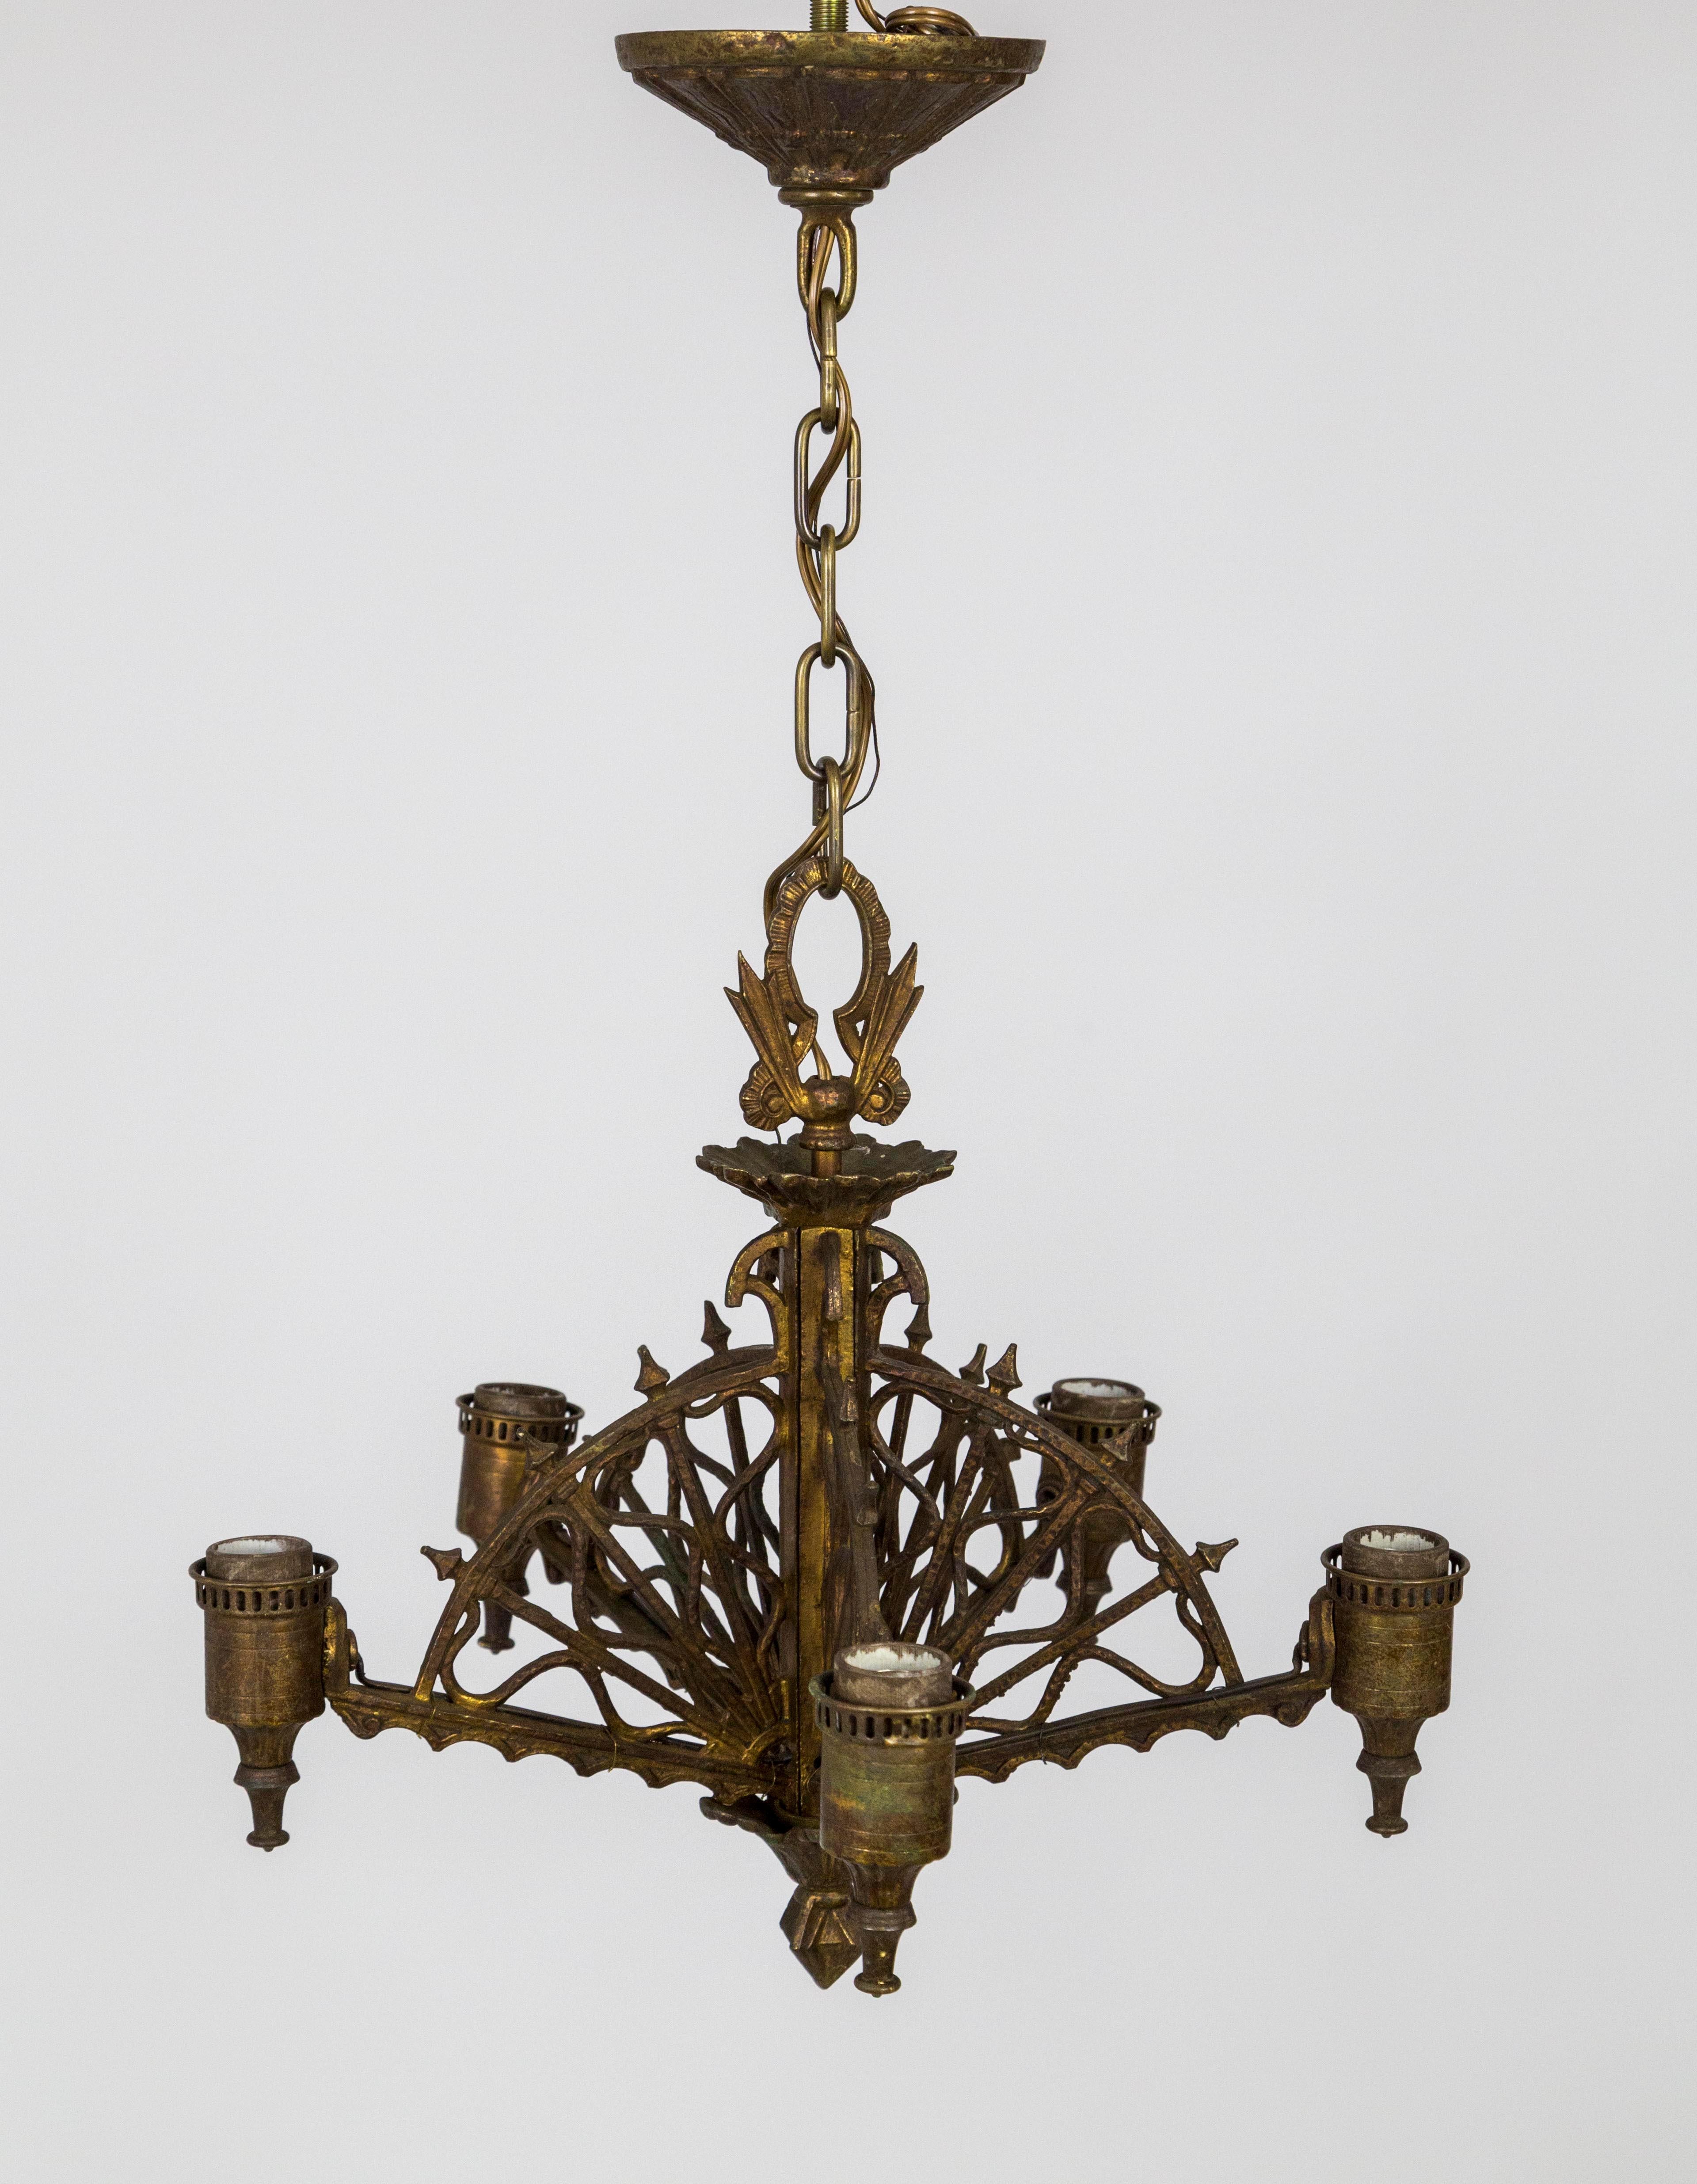 A brass chandelier with 5 arms of radial, webbed, arrows arcing to the center stem. Made by Lightolier in the early 20th century; with a complex, brass-bronze patina and decorative top hook and matching canopy. Newly wired. 24”total drop, 15